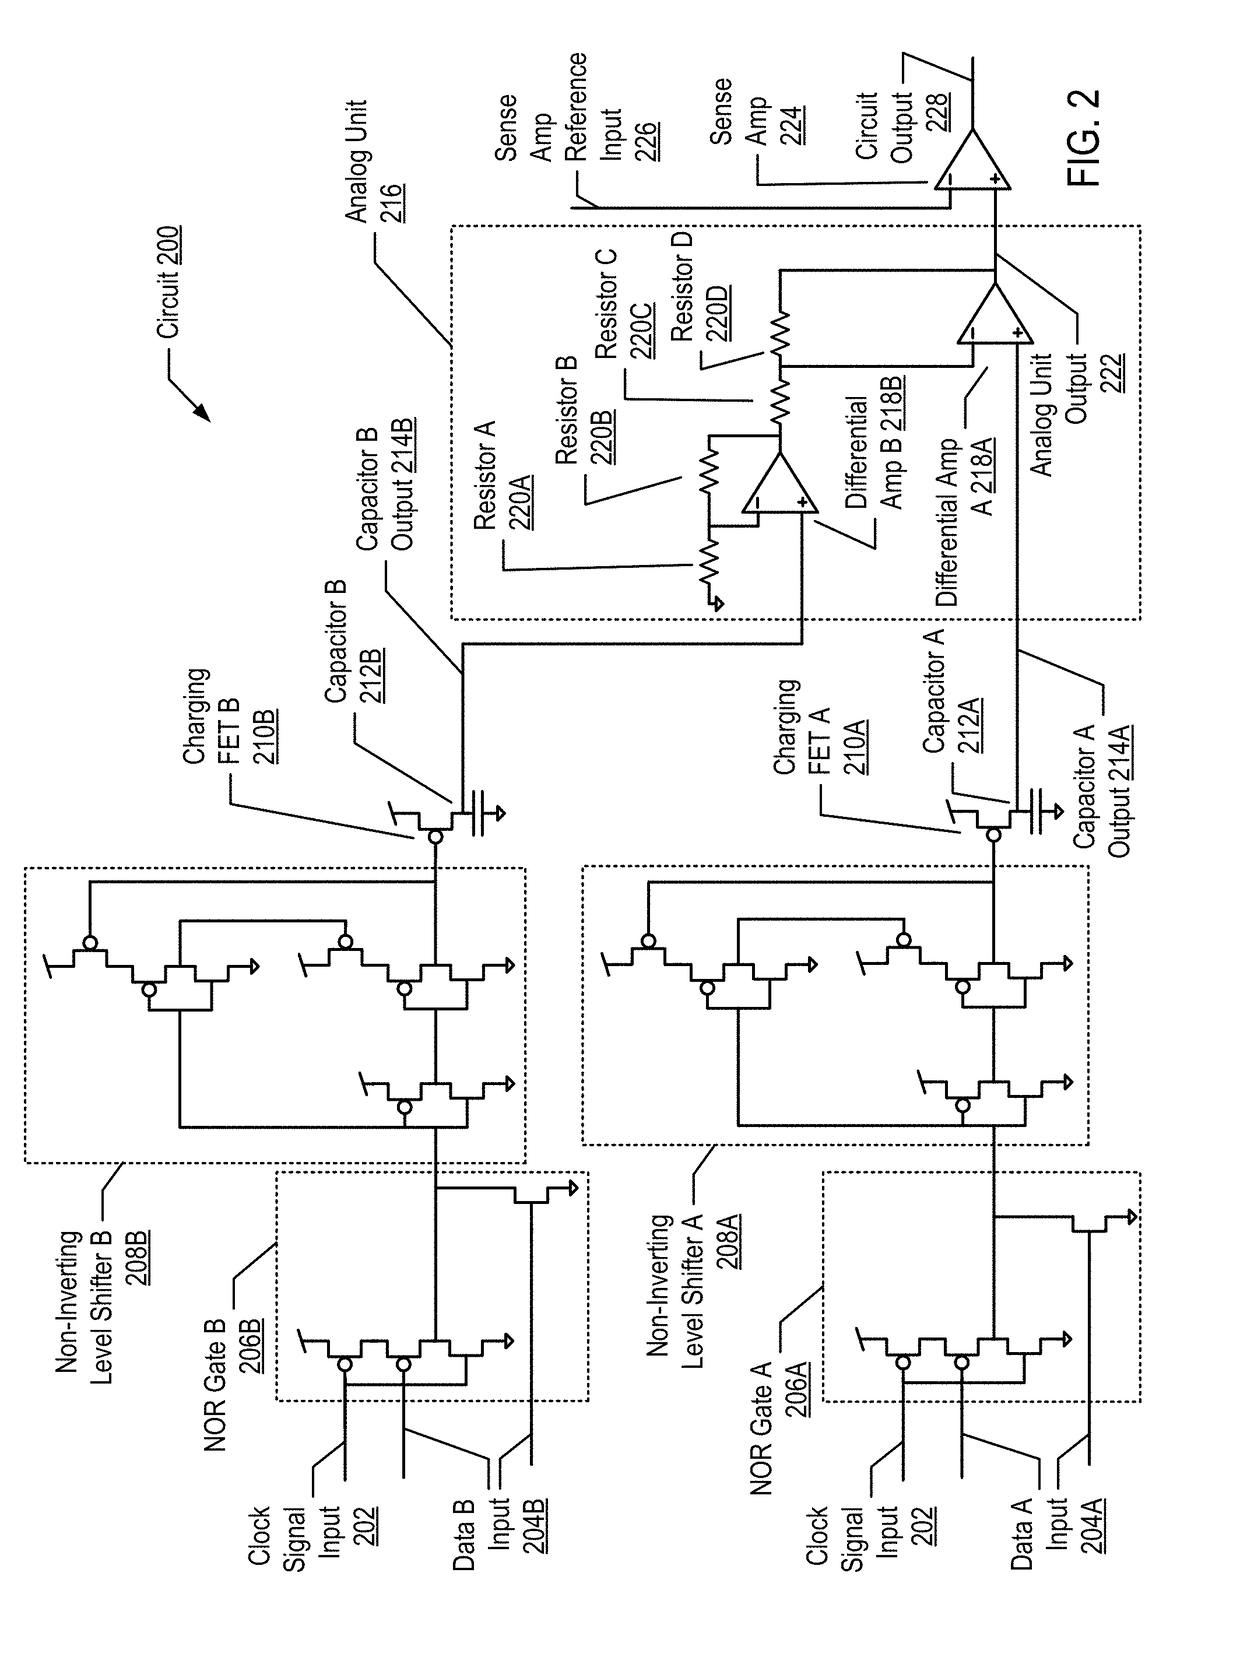 Cognitive analysis using applied analog circuits